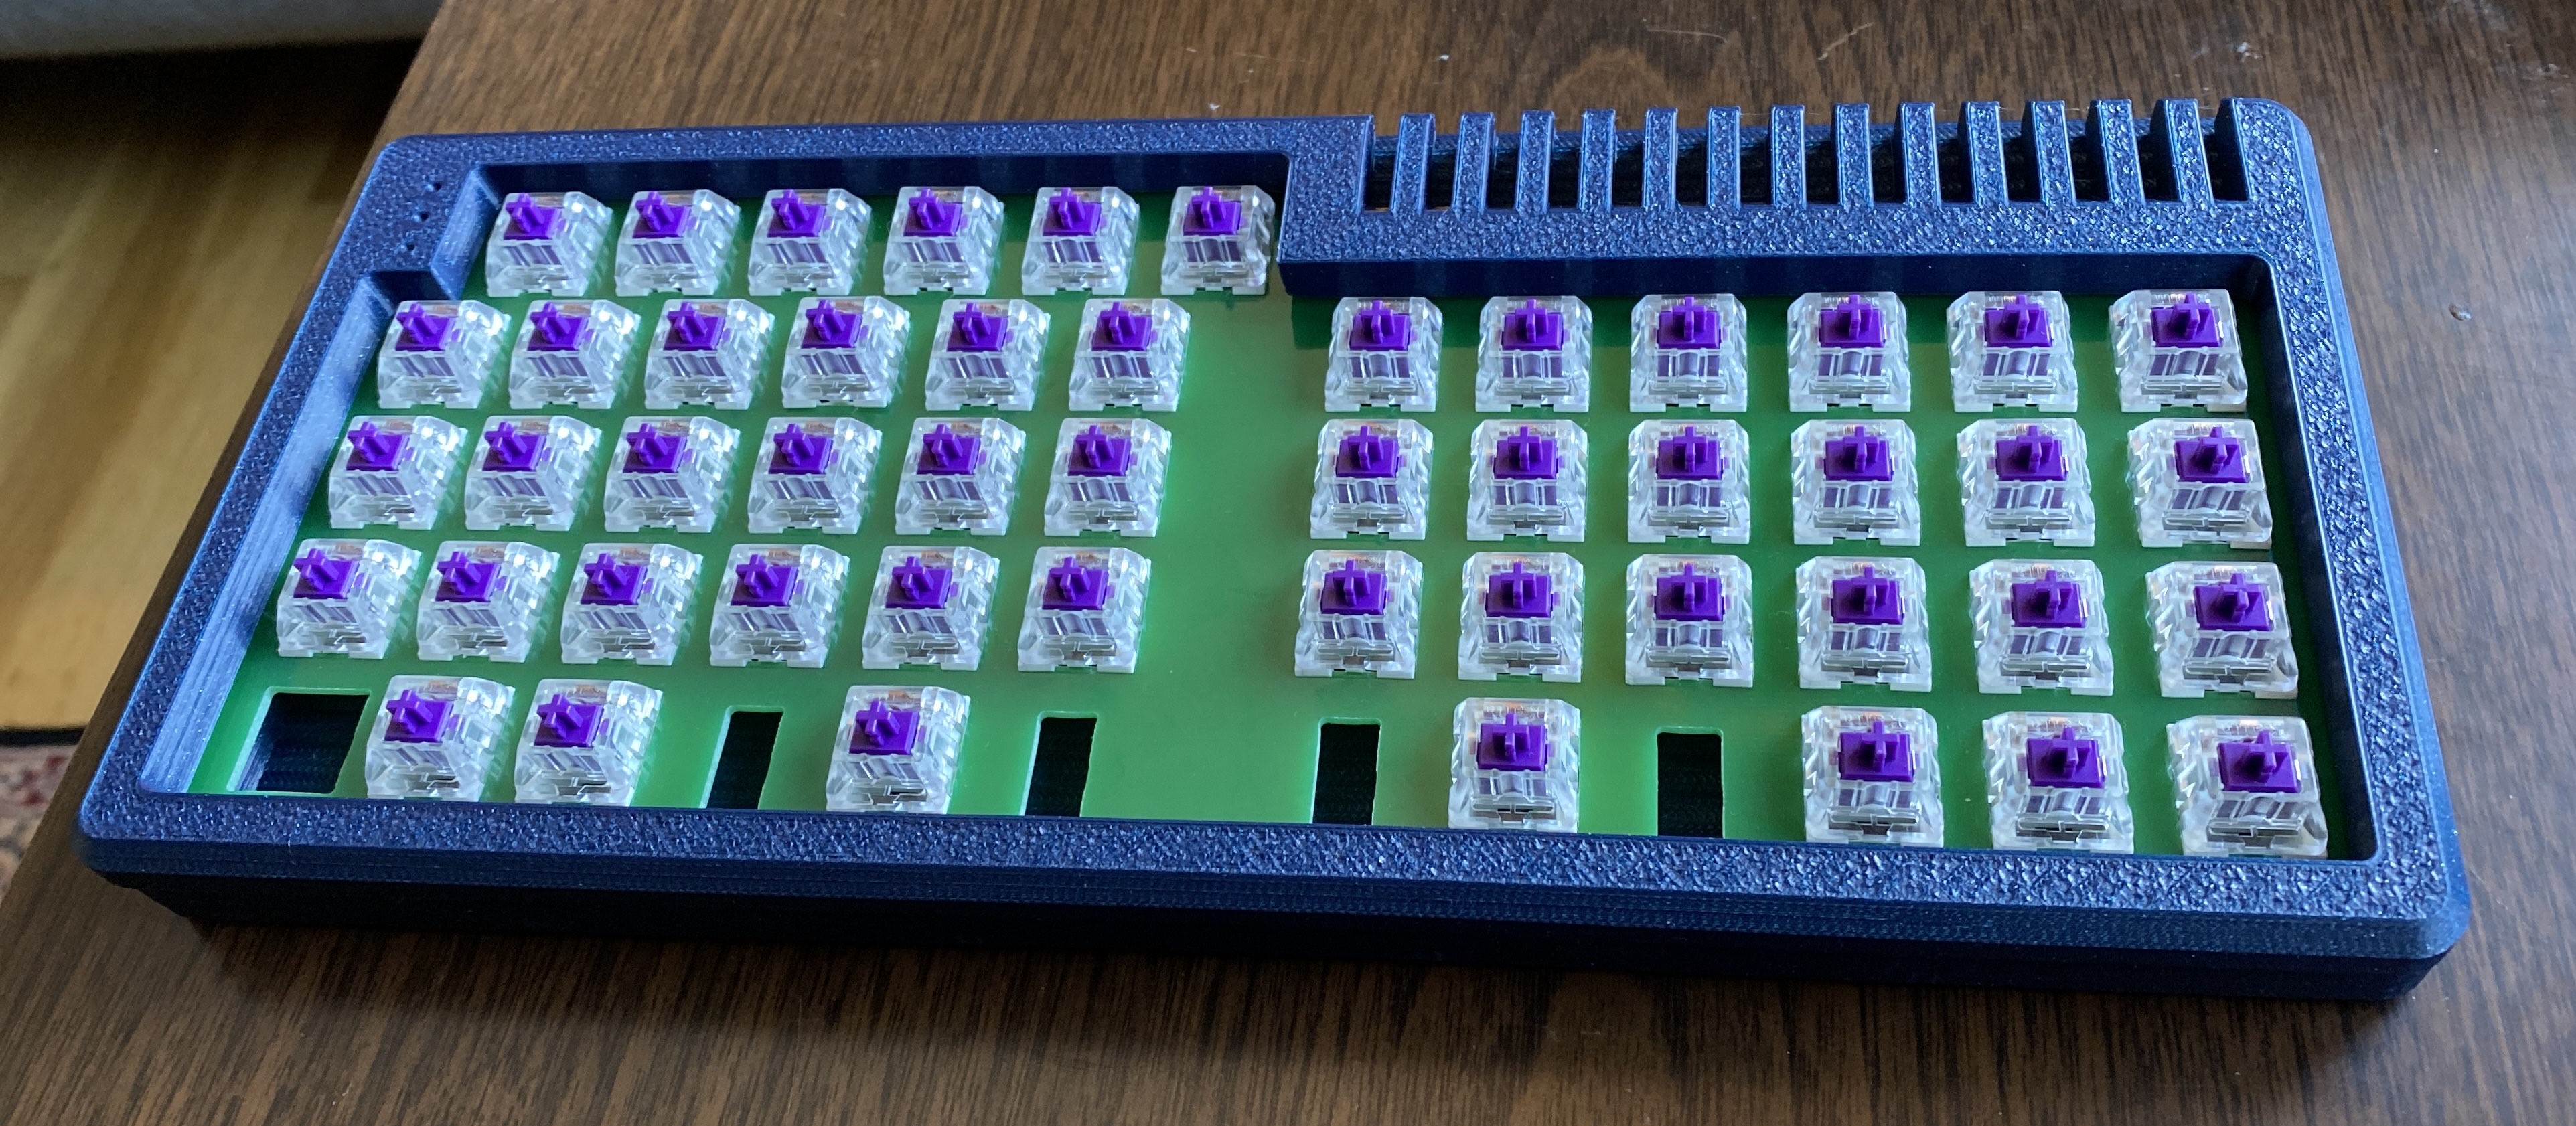 A green FR4 V4N4G0RTH0N plate with Zealios